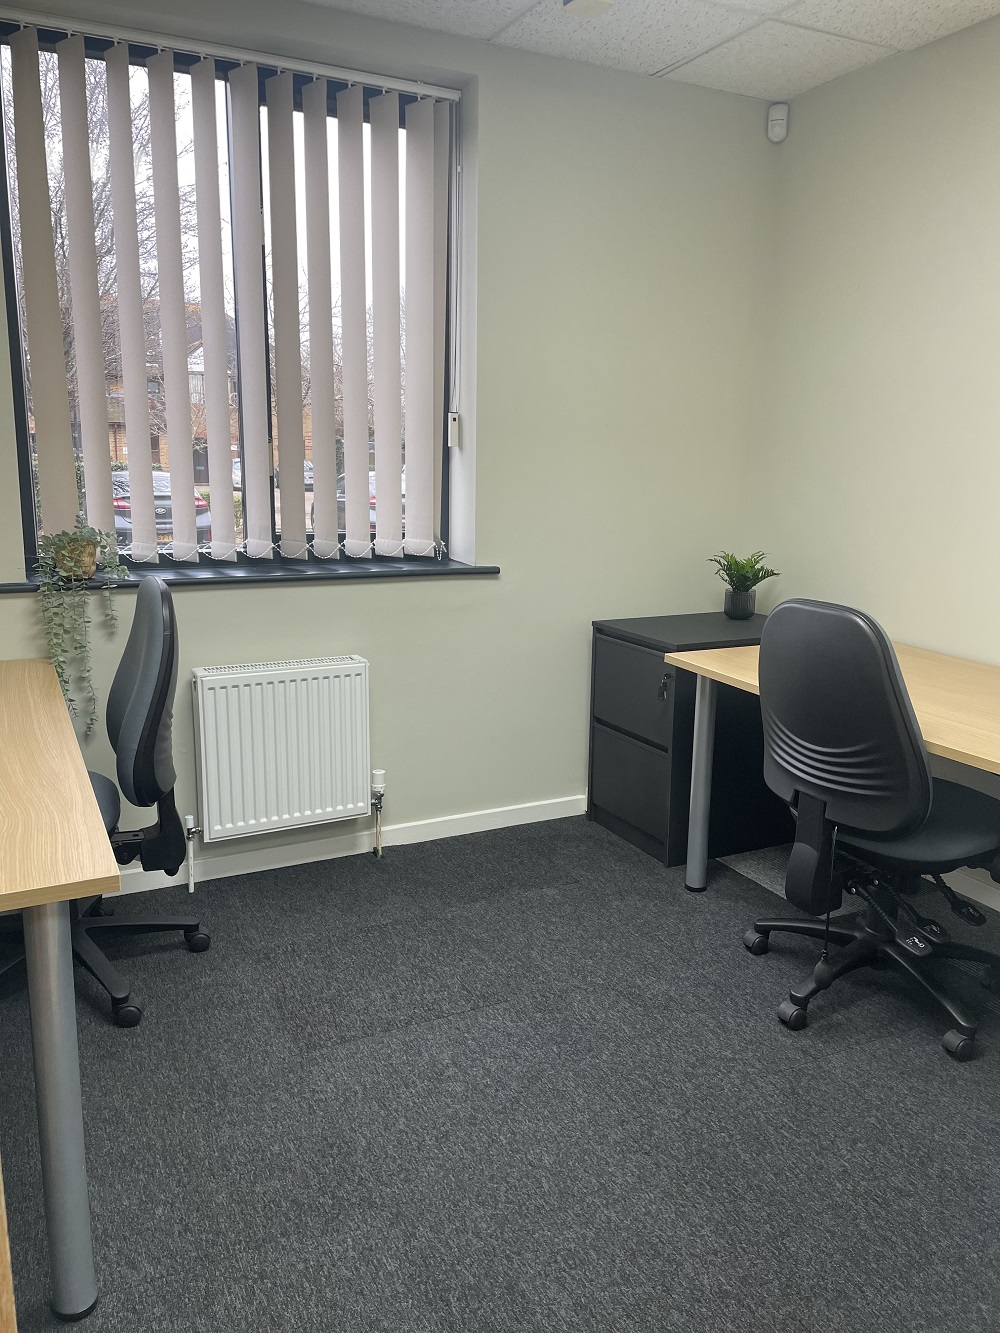 Offices to Rent in Maidstone, Kent – Community Co-Working in Maidstone